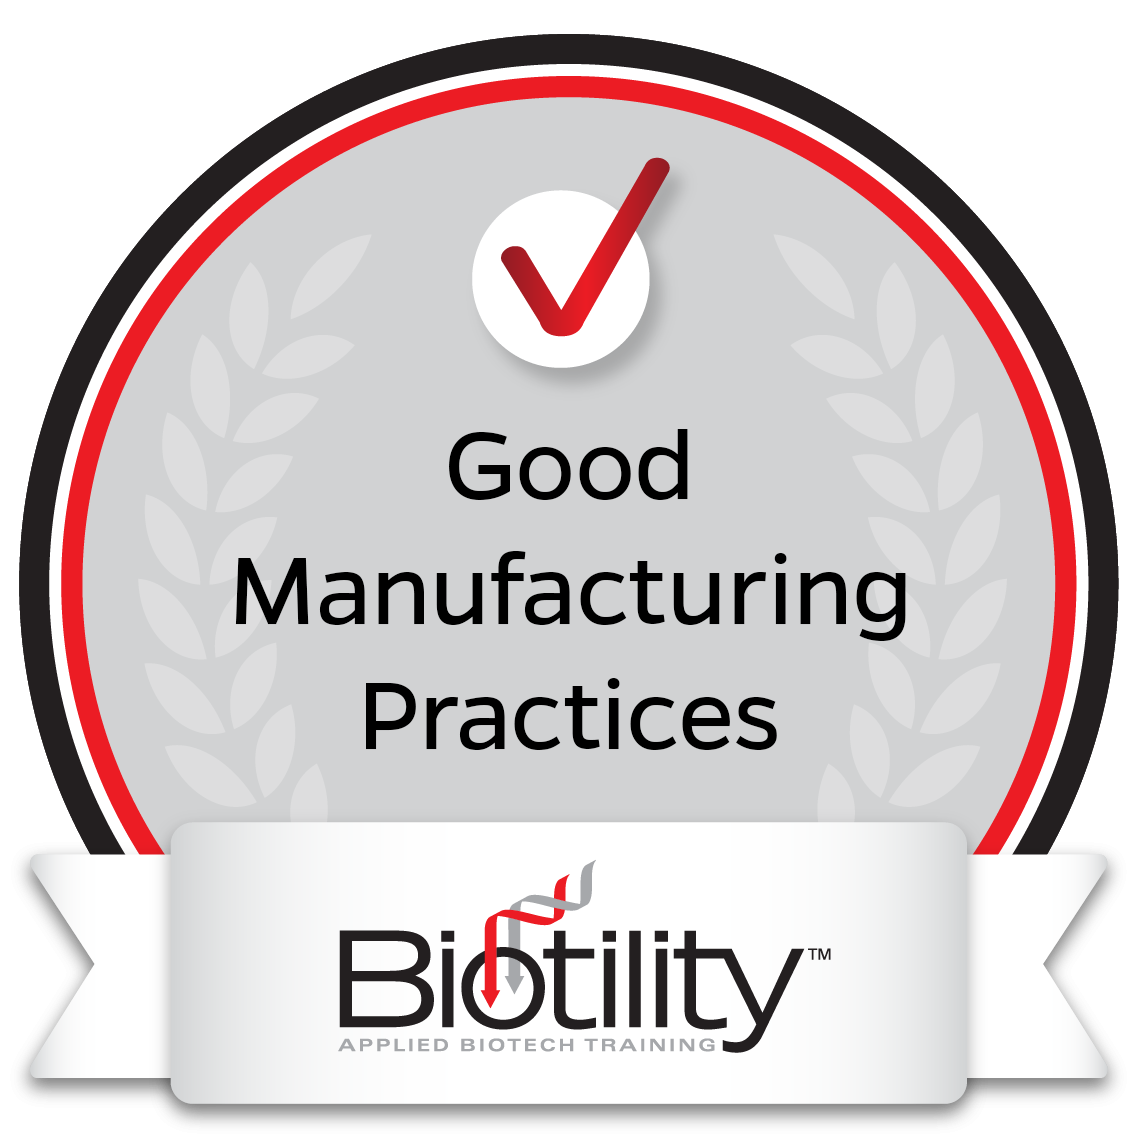 Good Manufacturing Practices badge